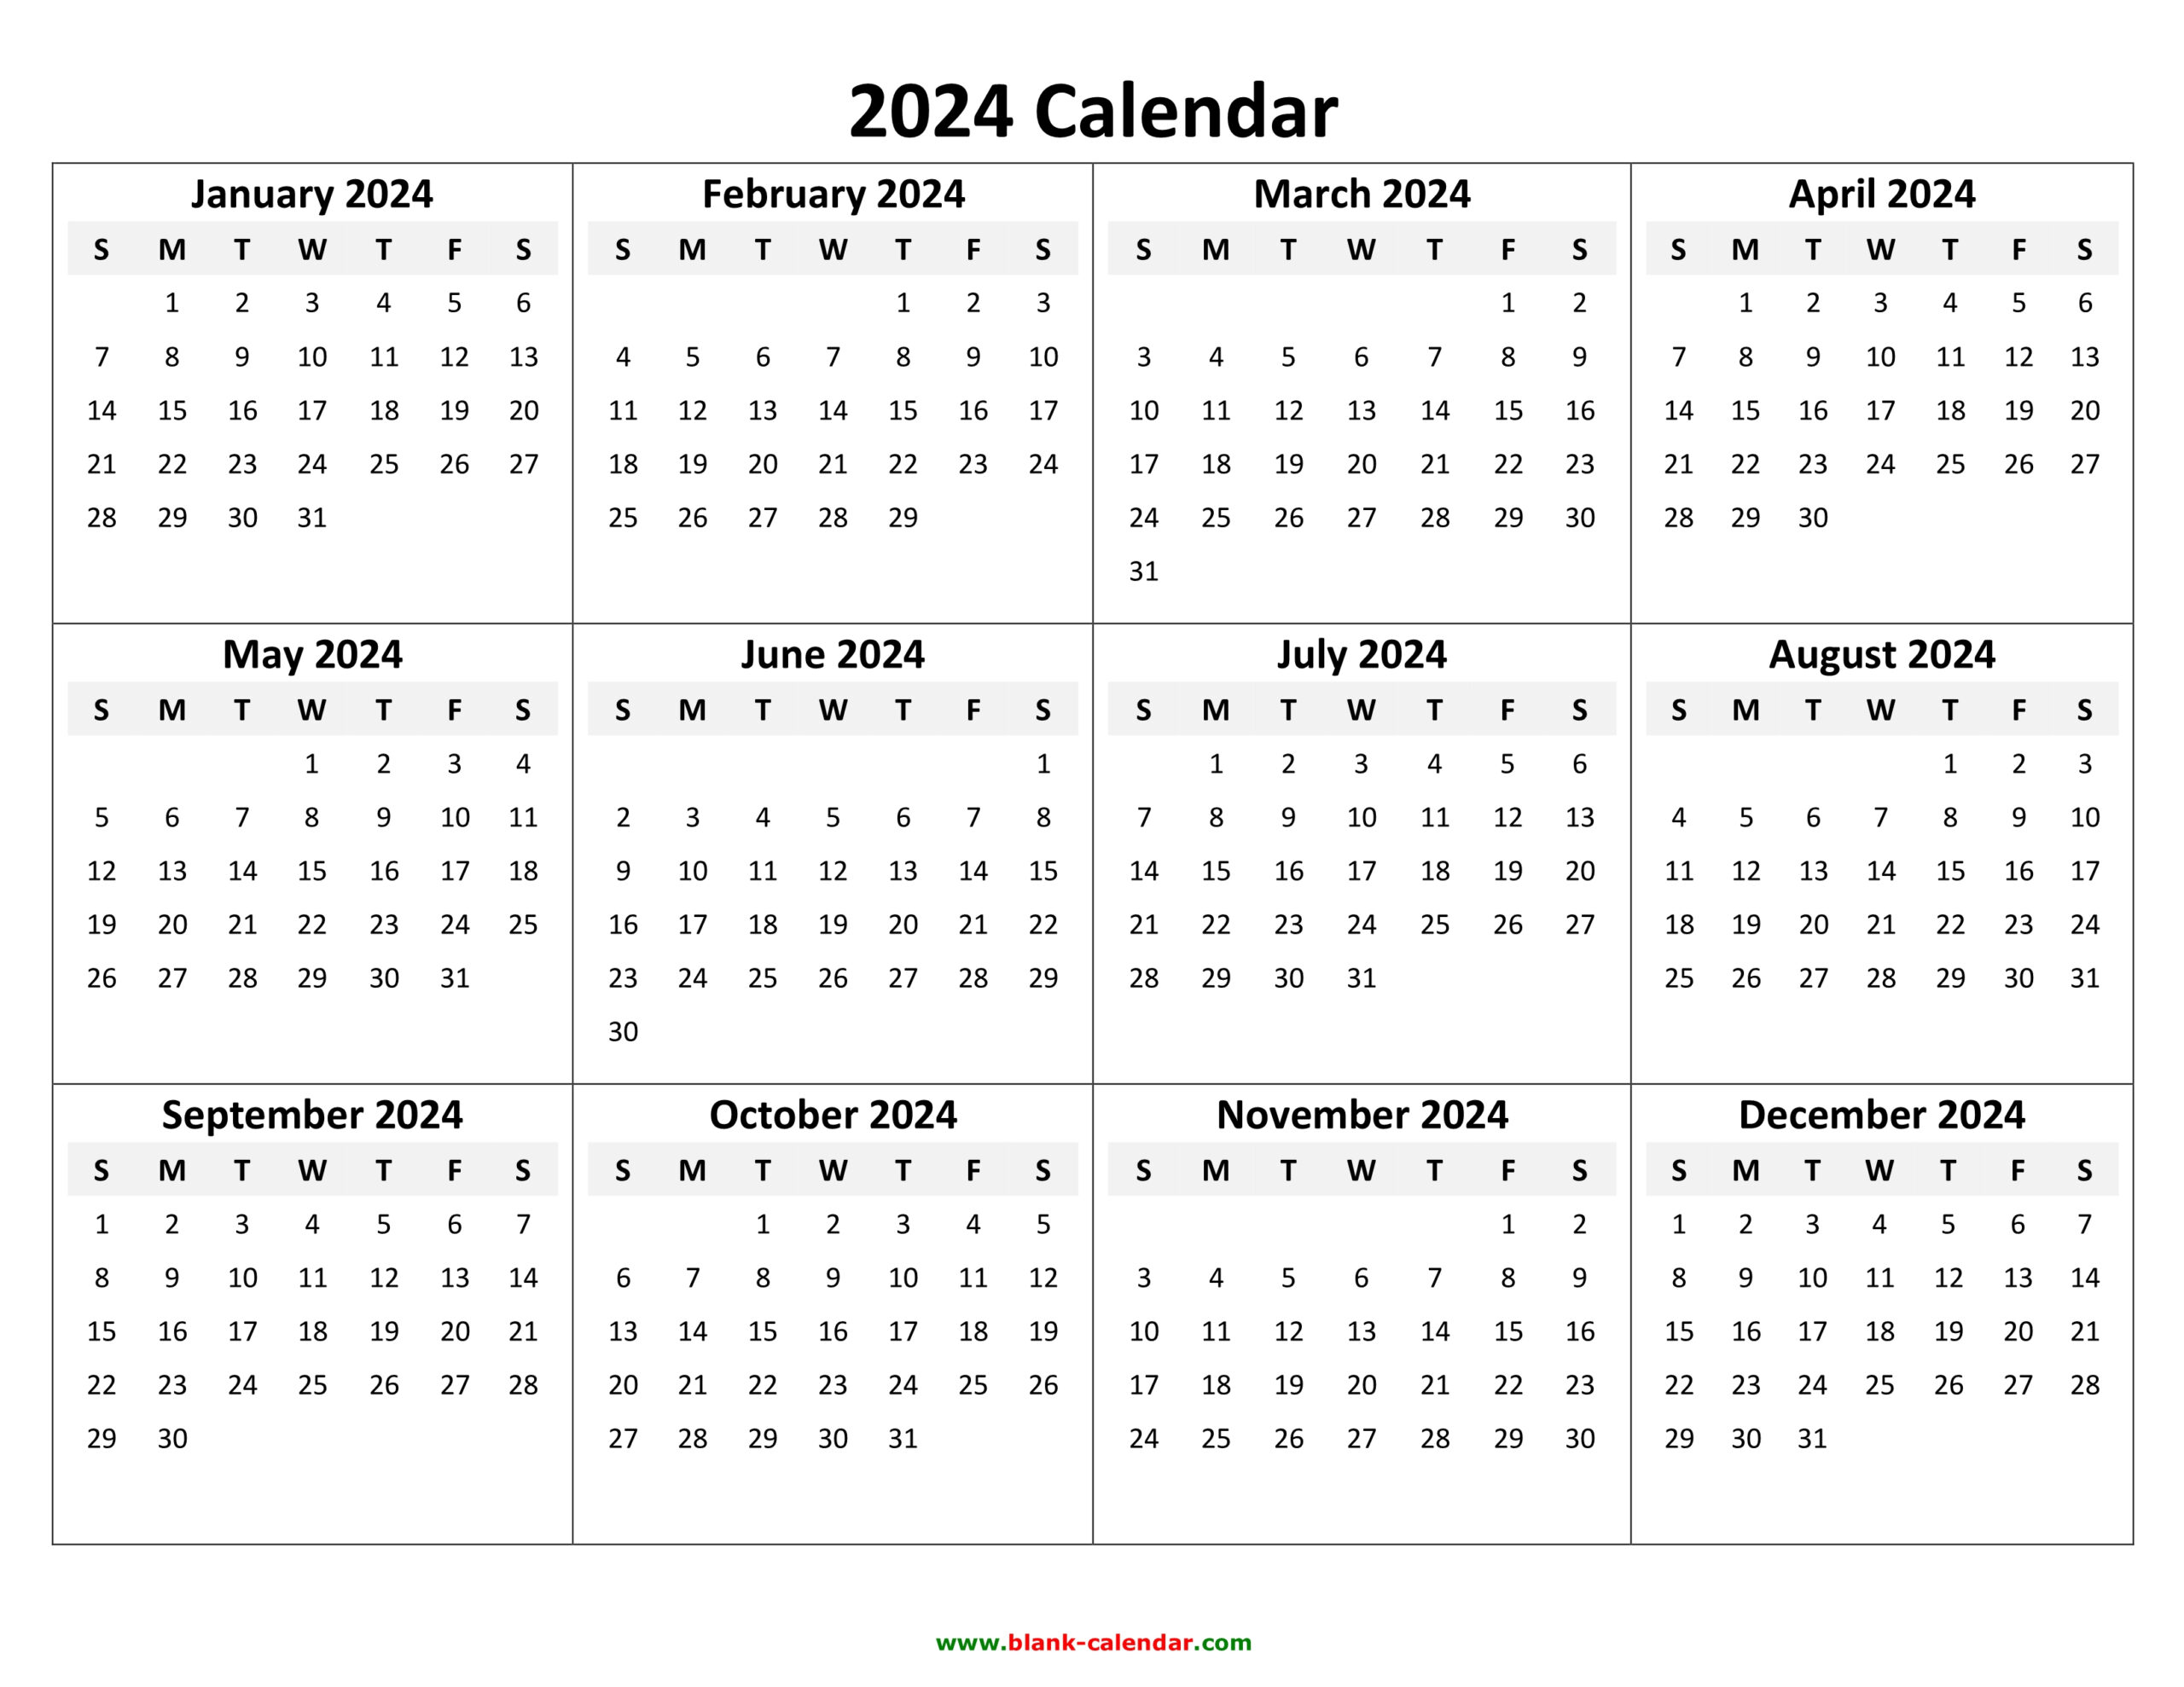 Yearly Calendar 2024 | Free Download And Print for 2024-2024 Calendar Printable